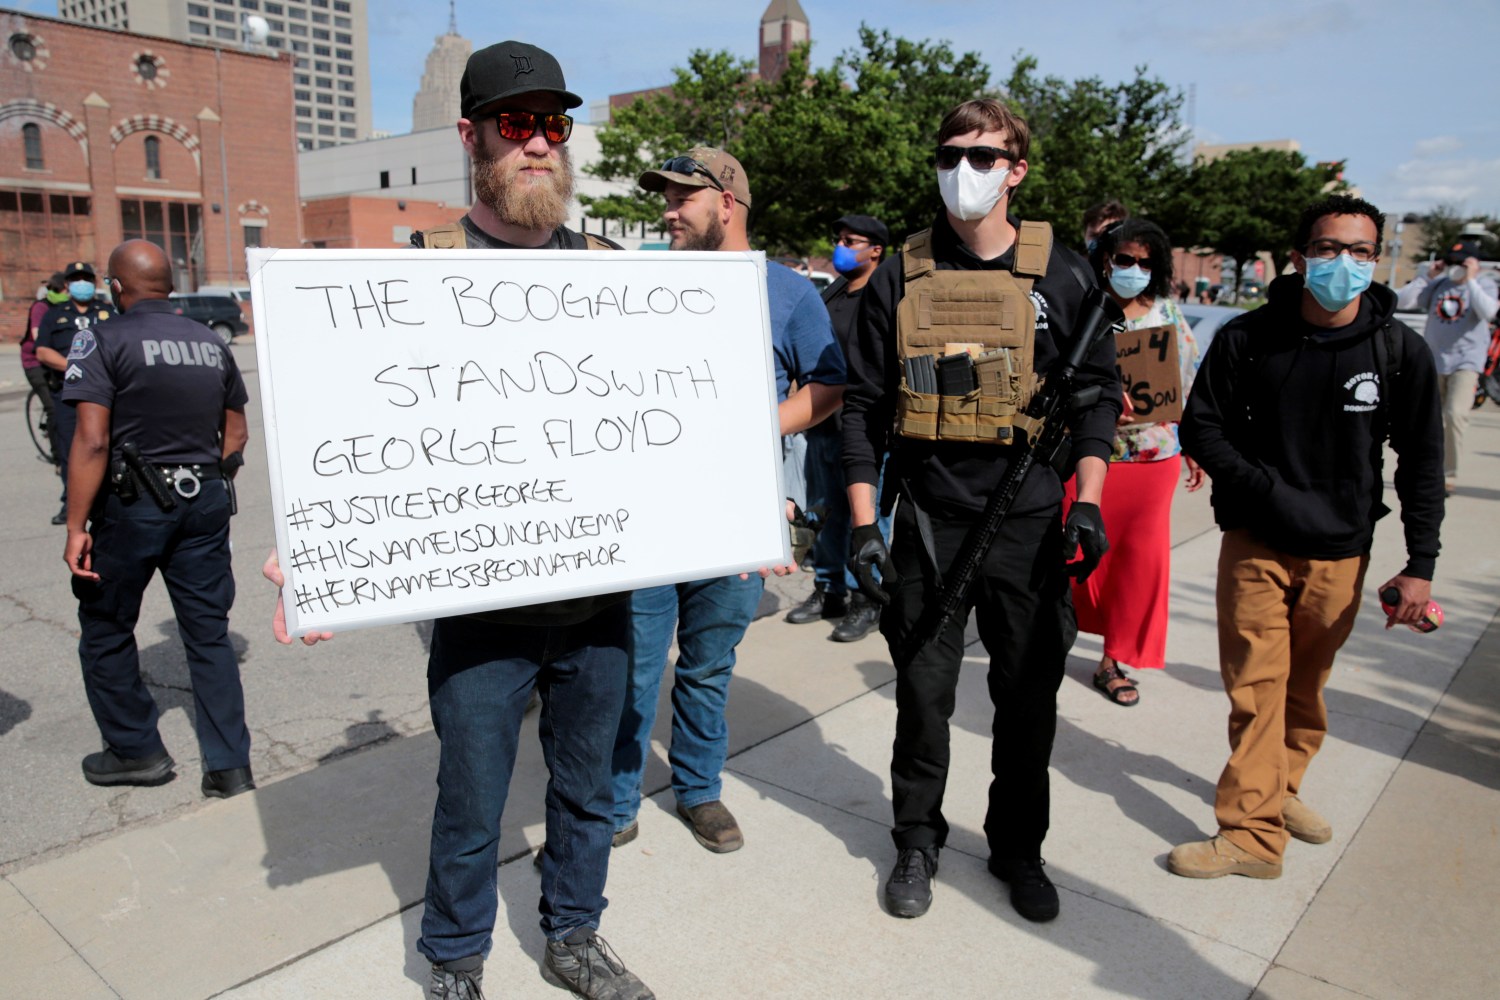 Armed men, one carrying a "The Boogaloo stands with George Floyd" sign, are seen as protesters rally against the death in Minneapolis police custody of George Floyd, in Detroit, Michigan, U.S. May 30, 2020. Picture taken May 30, 2020.   REUTERS/Rebecca Cook